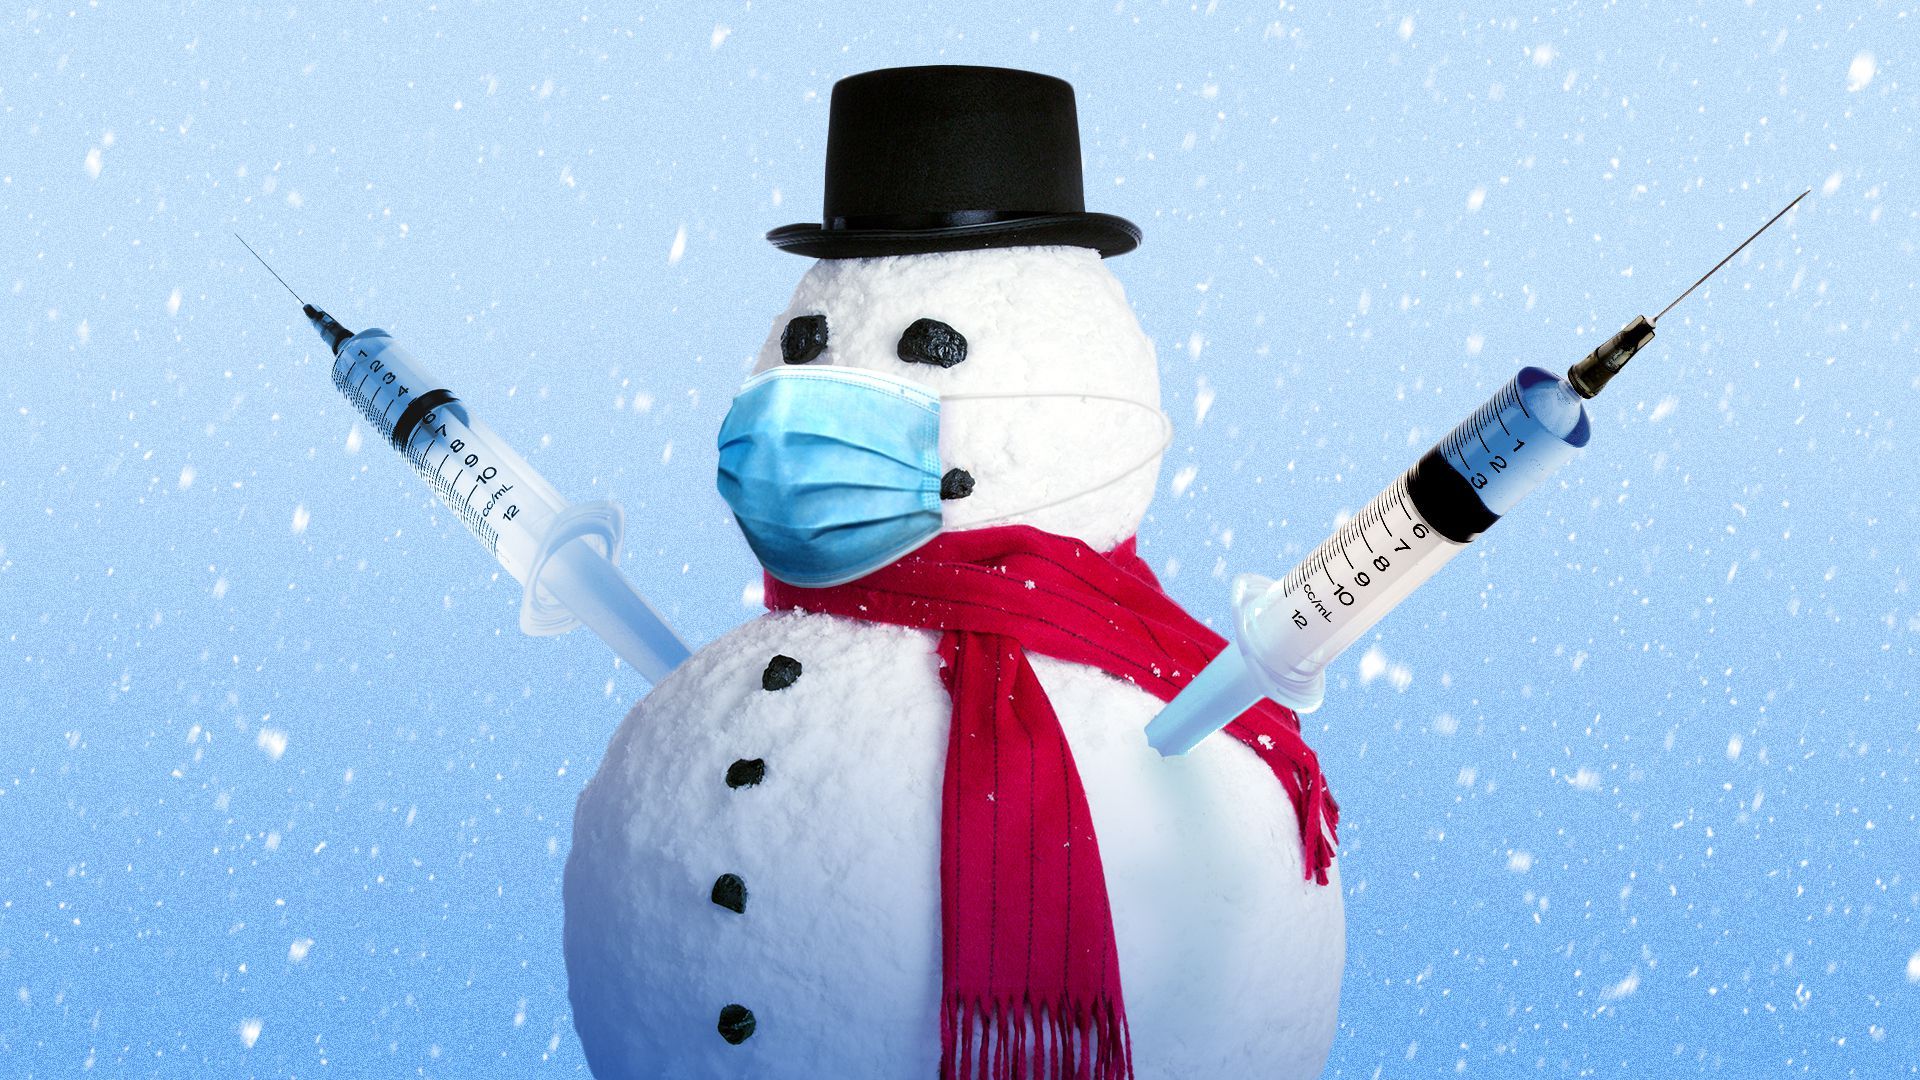 Illustration of a snowman wearing a mask and with arms made from syringes